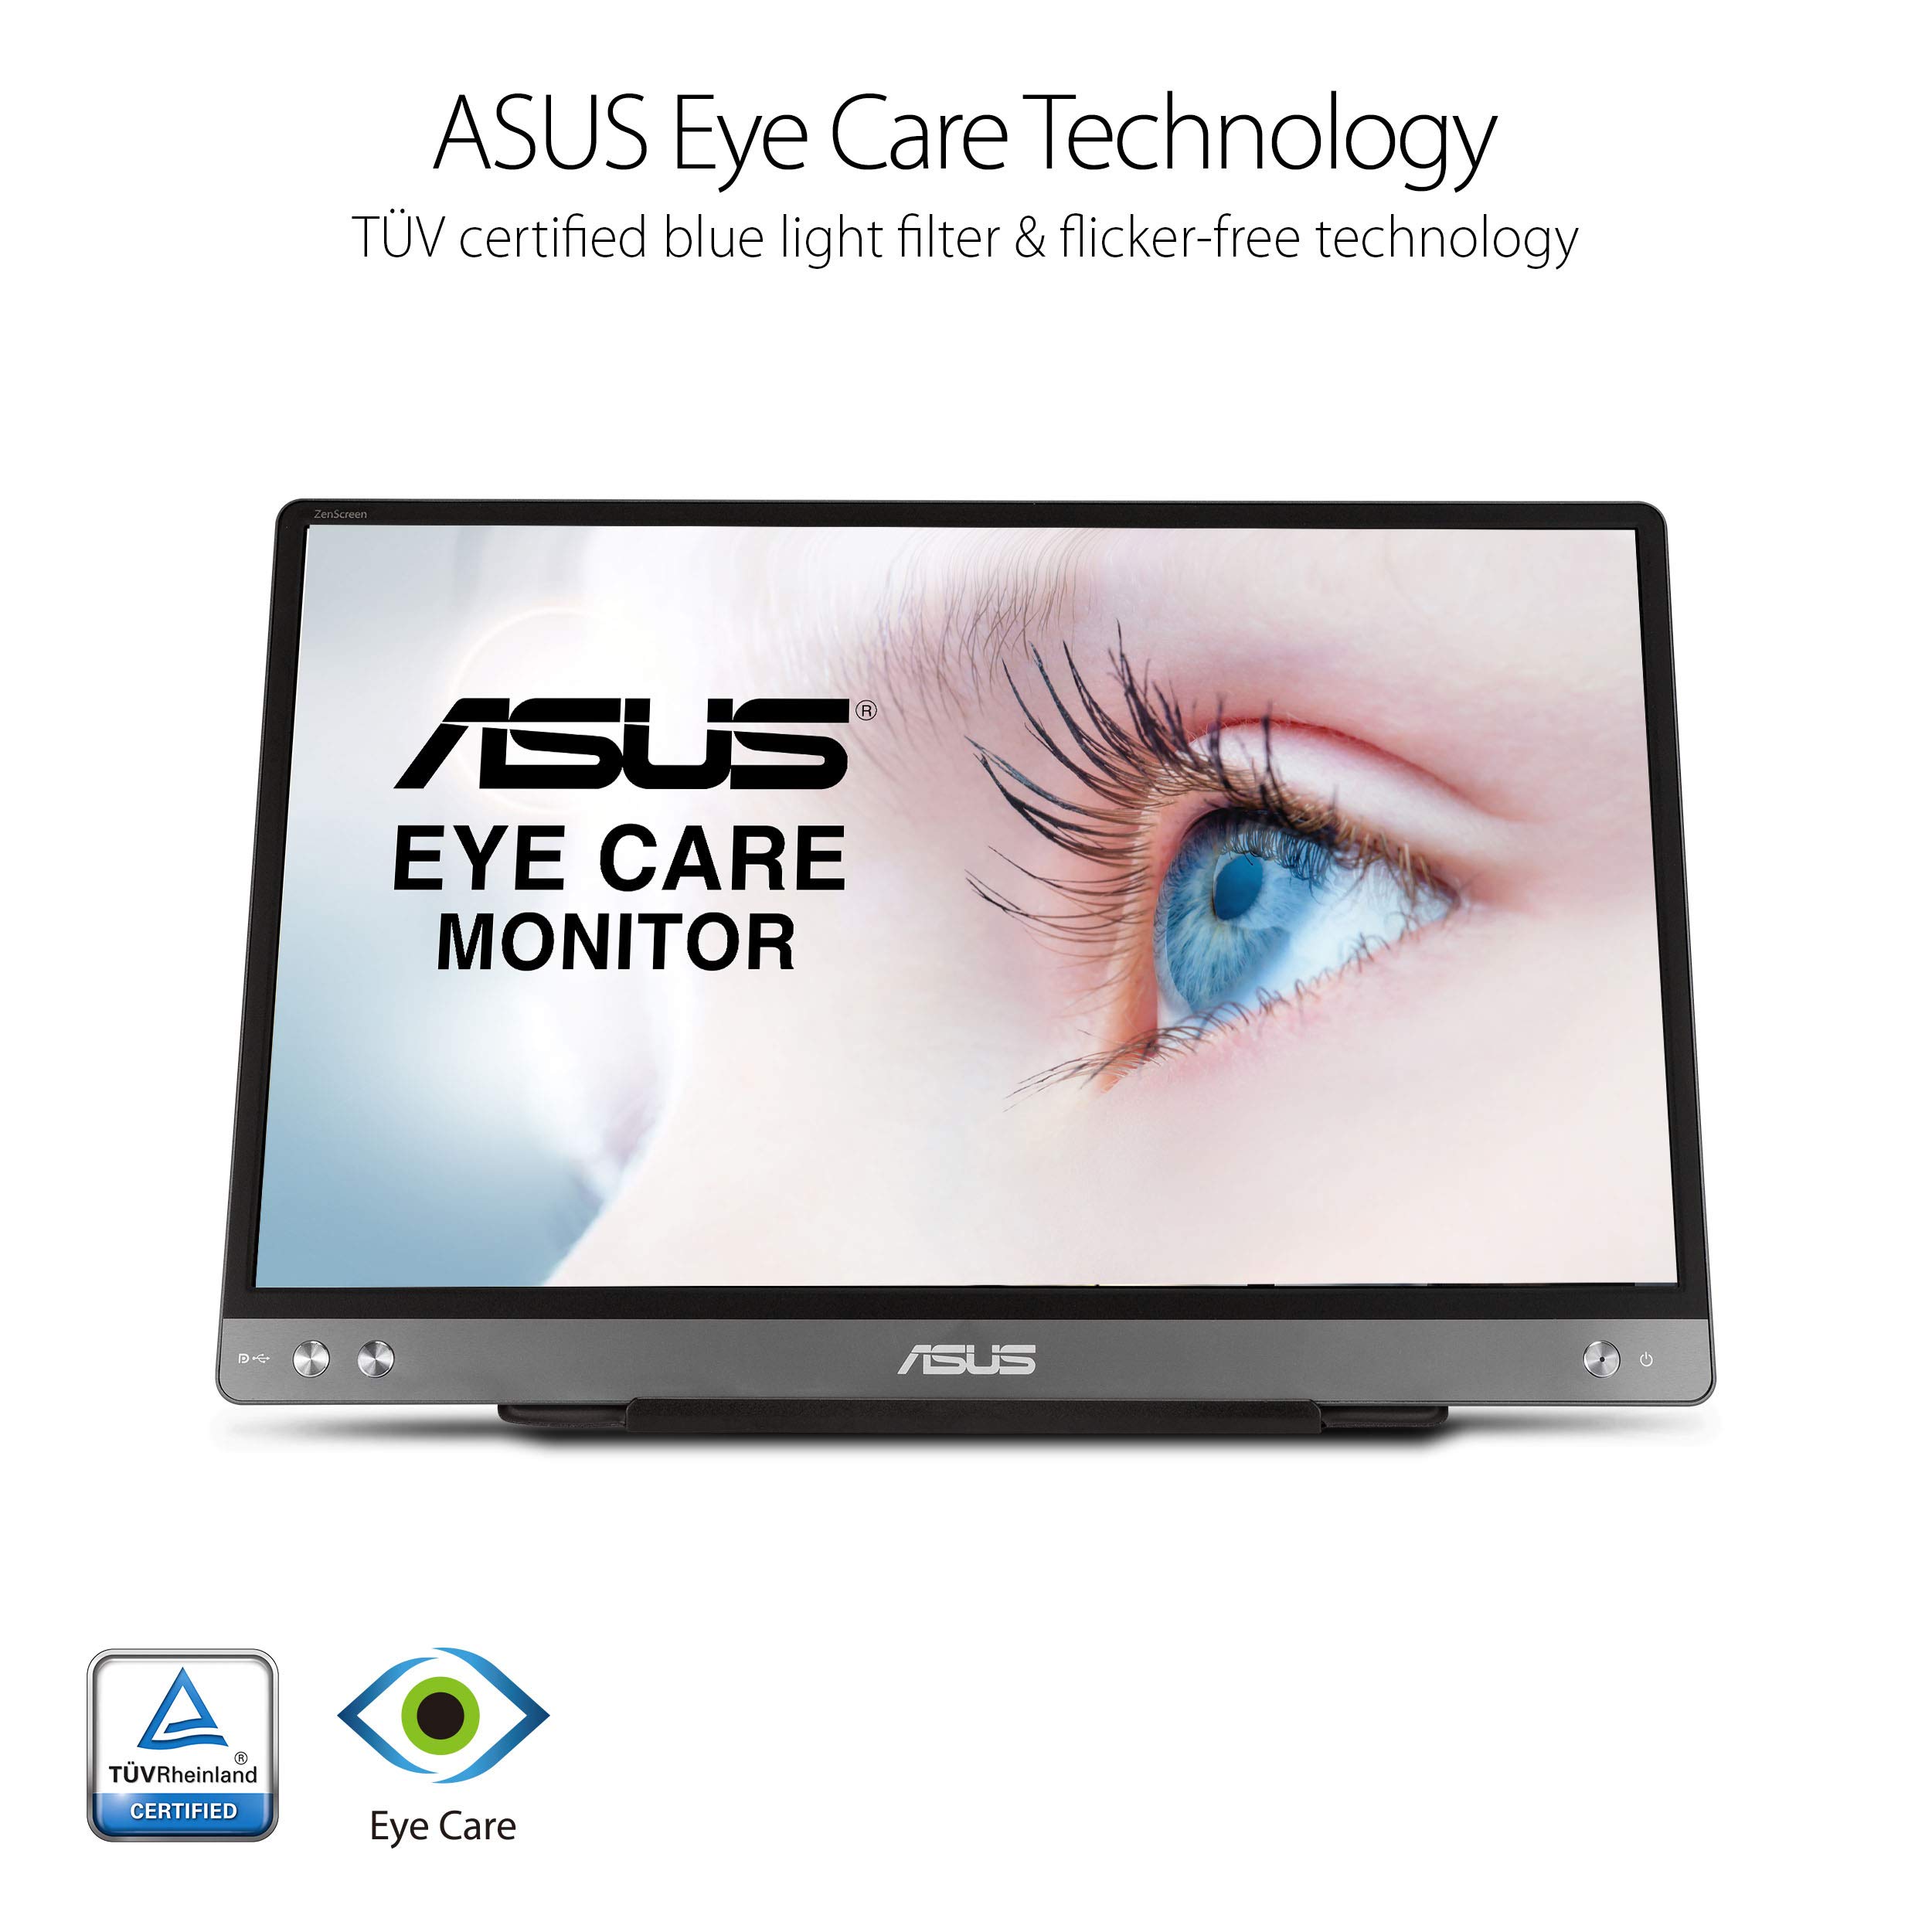 ASUS ZenScreen MB14AC 14” Portable USB Monitor, 1080P Full HD, IPS, USB Type-C, Eye Care, Anti-glare surface, External Screen for Laptop, Hybrid Signal Solution, 3-Year Warranty , GRAY